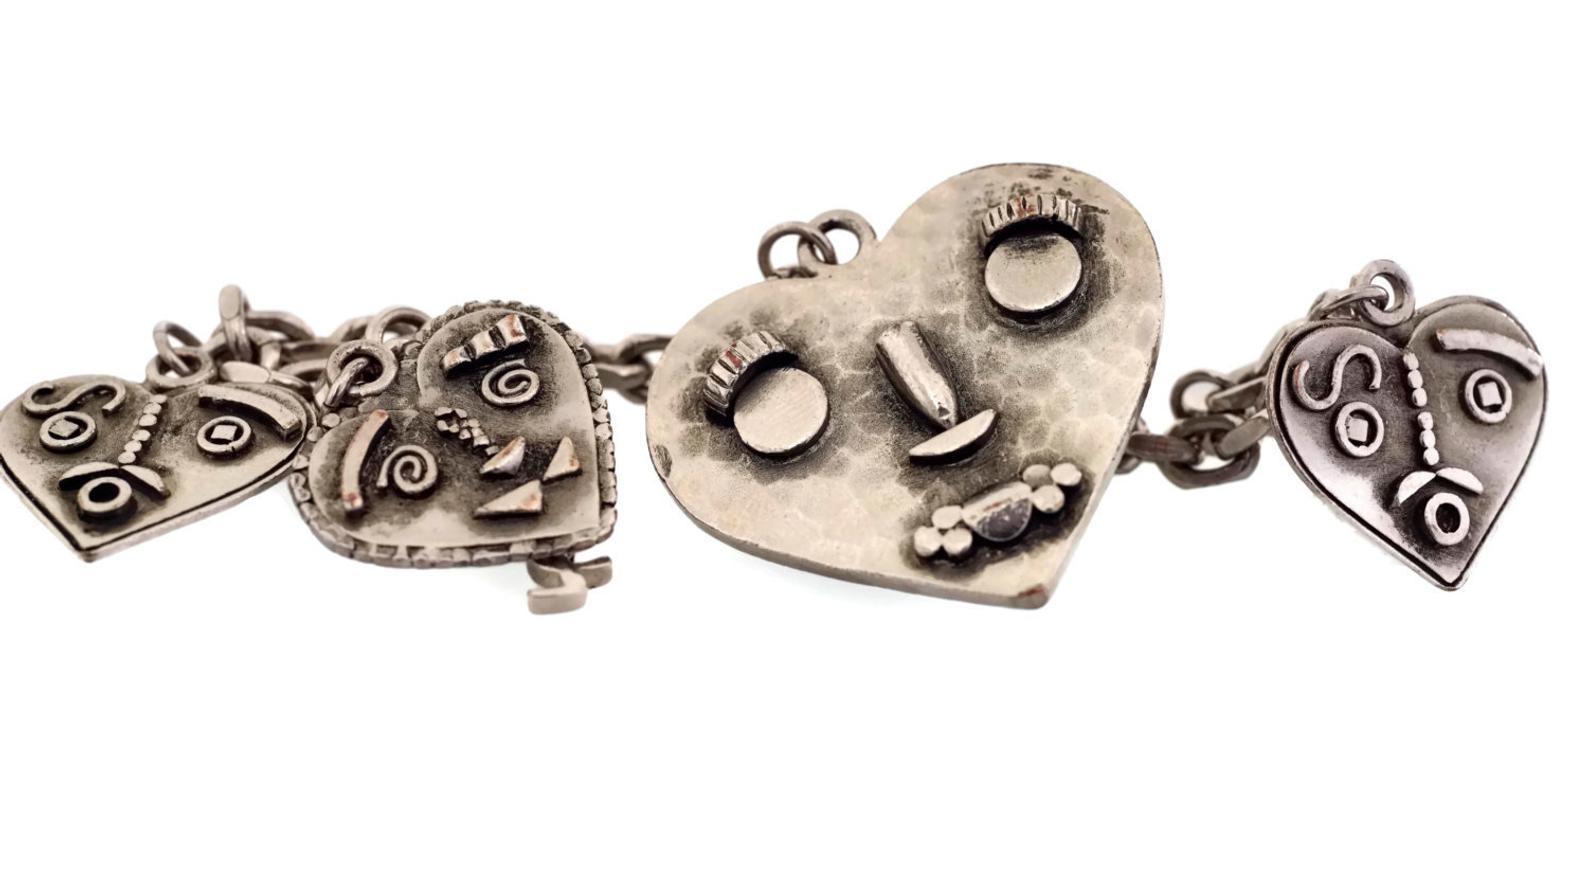 Vintage YVES SAINT LAURENT YSL Steampunk Heart Faces Charm Bracelet

Measurements:
Large Heart: 1 3/8 inches X 1 4/8 inches
Small Hearts: 8/8 inch X 9/8 inch
Length: 7 6/8 inches ( adjustable)

Features:
- 100% Authentic YVES SAINT LAURENT.
- 4